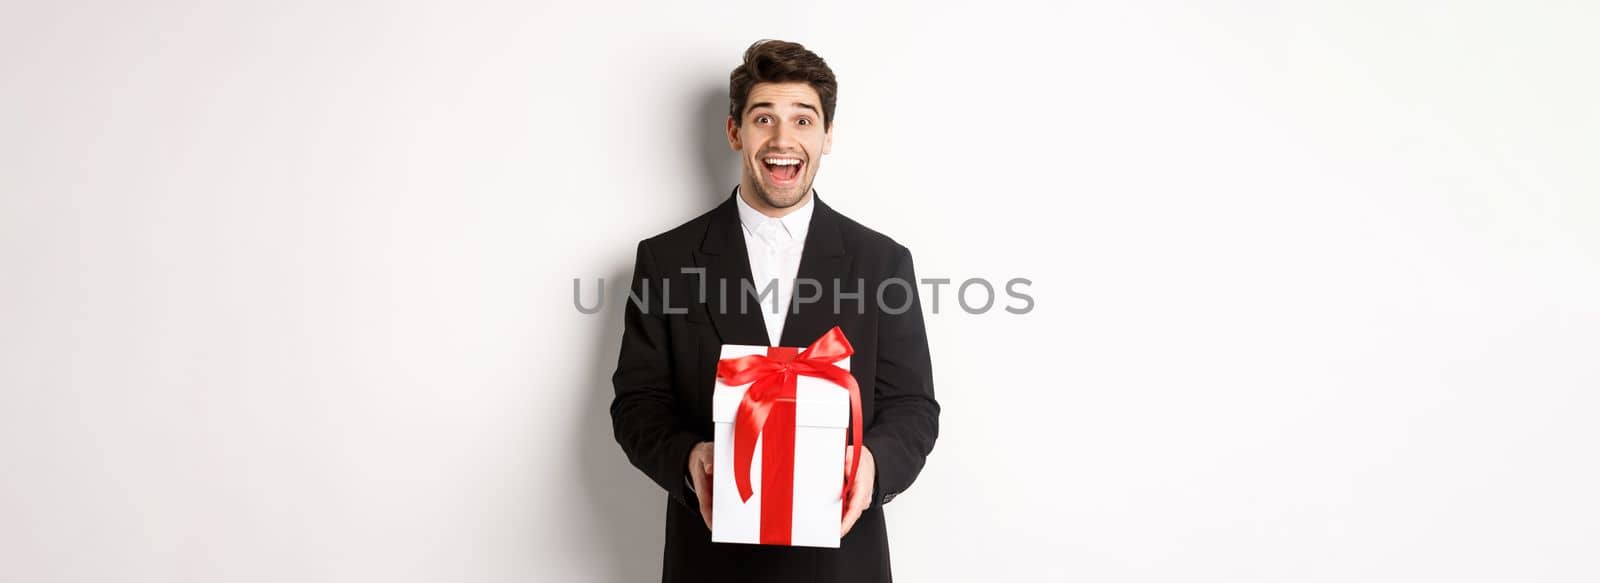 Concept of christmas holidays, celebration and lifestyle. Image of handsome guy in black suit looking excited, have a gift, standing against white background.